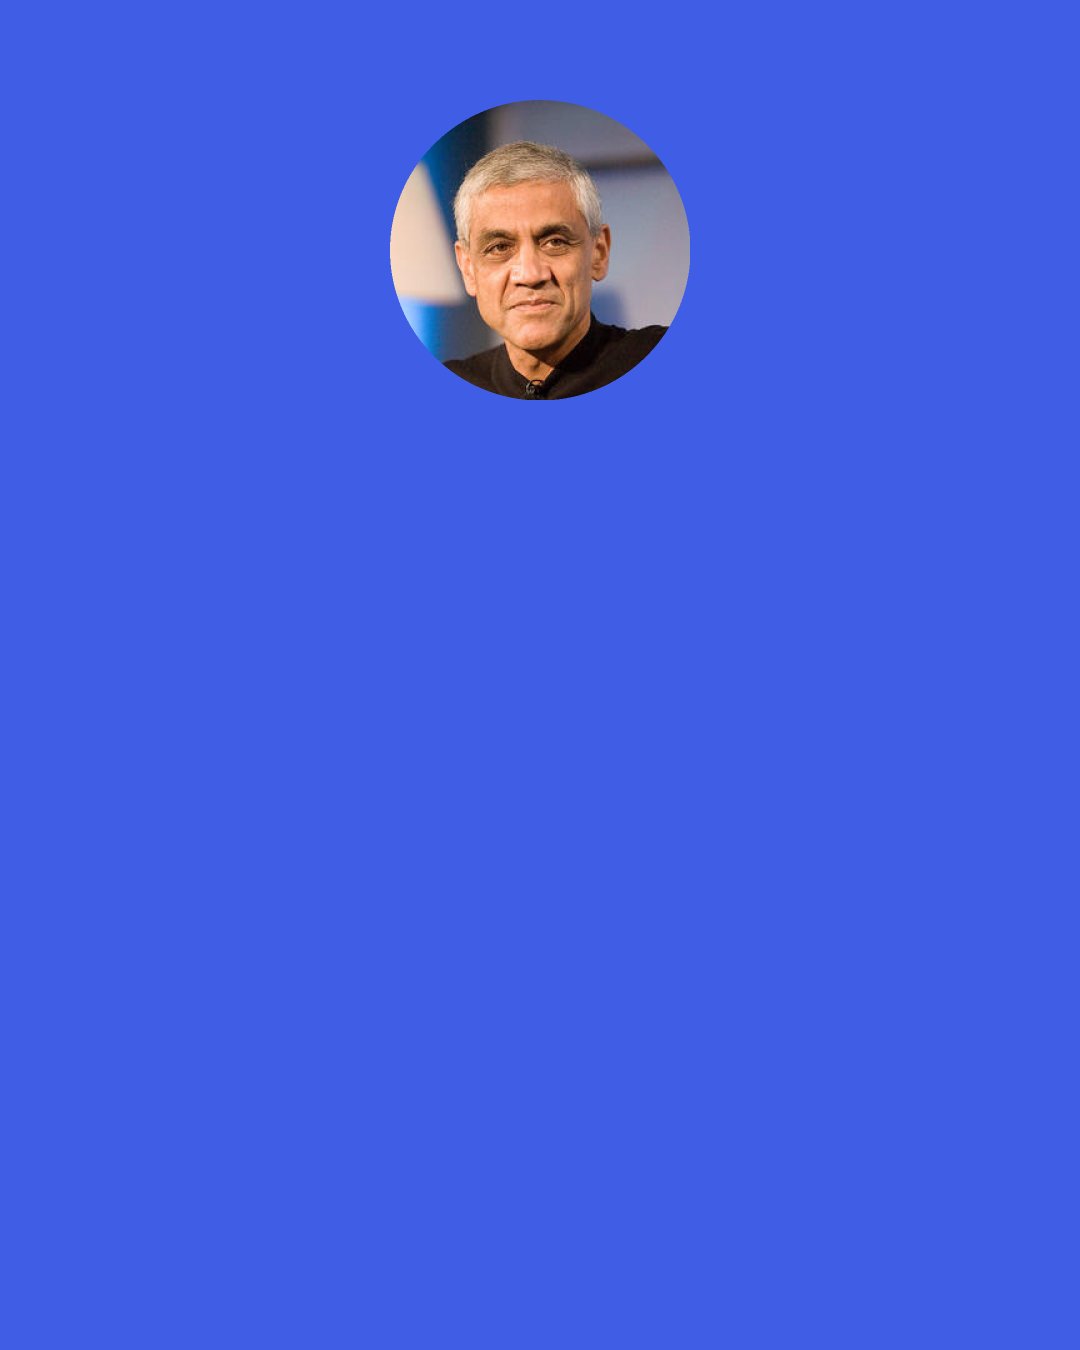 Vinod Khosla: In my view, it’s irreverence, foolish confidence and naivety combined with persistence, open mindedness and a continual ability to learn that created Facebook, Google, Yahoo, eBay, Microsoft, Apple, Juniper, AOL, Sun Microsystems and others.